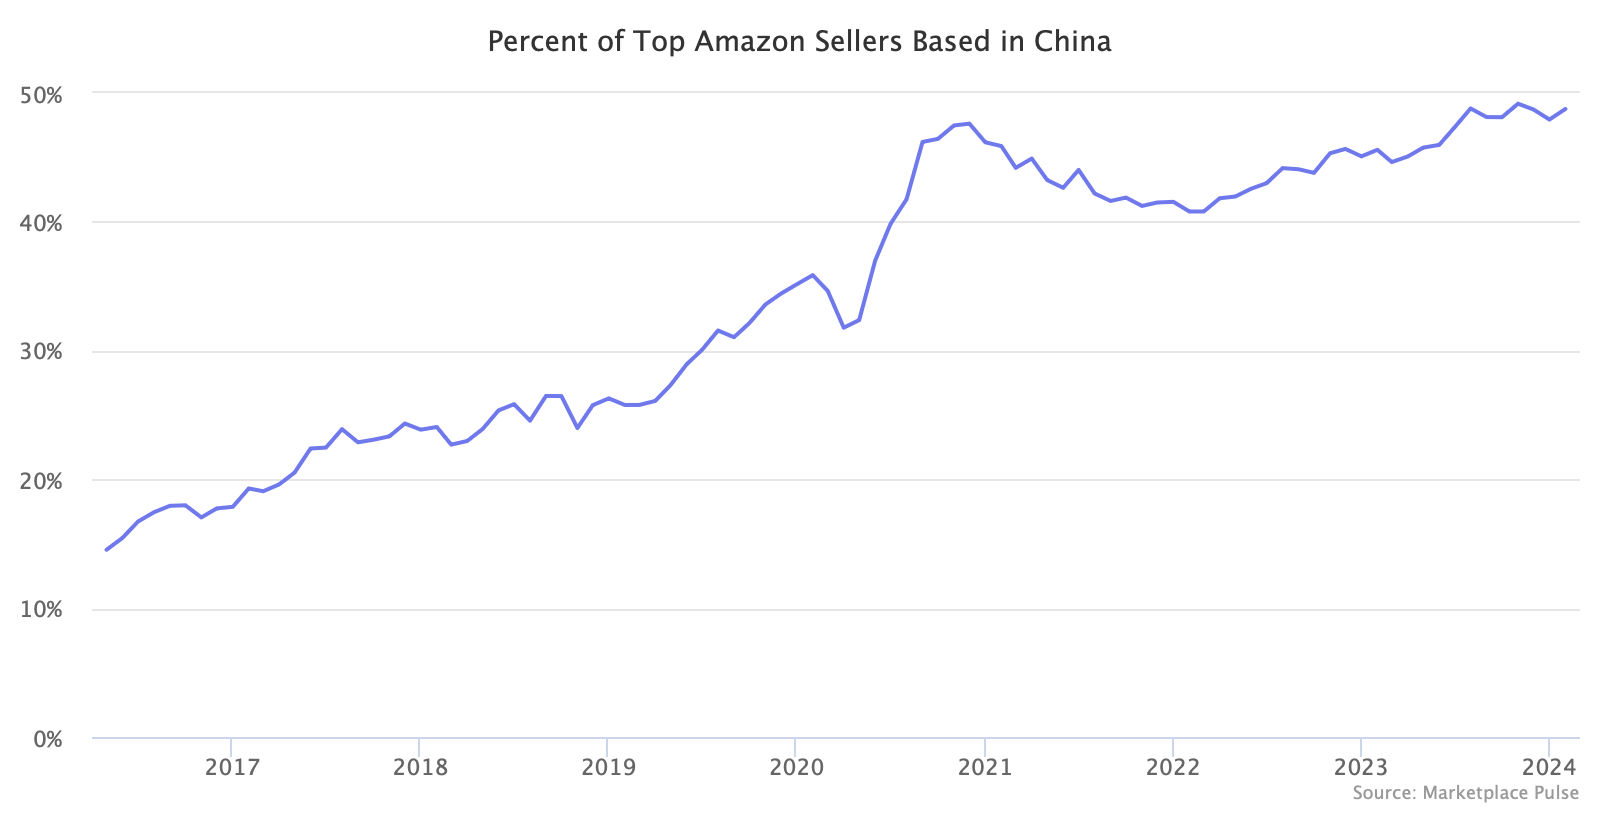 Percent of Top Amazon Sellers Based in China